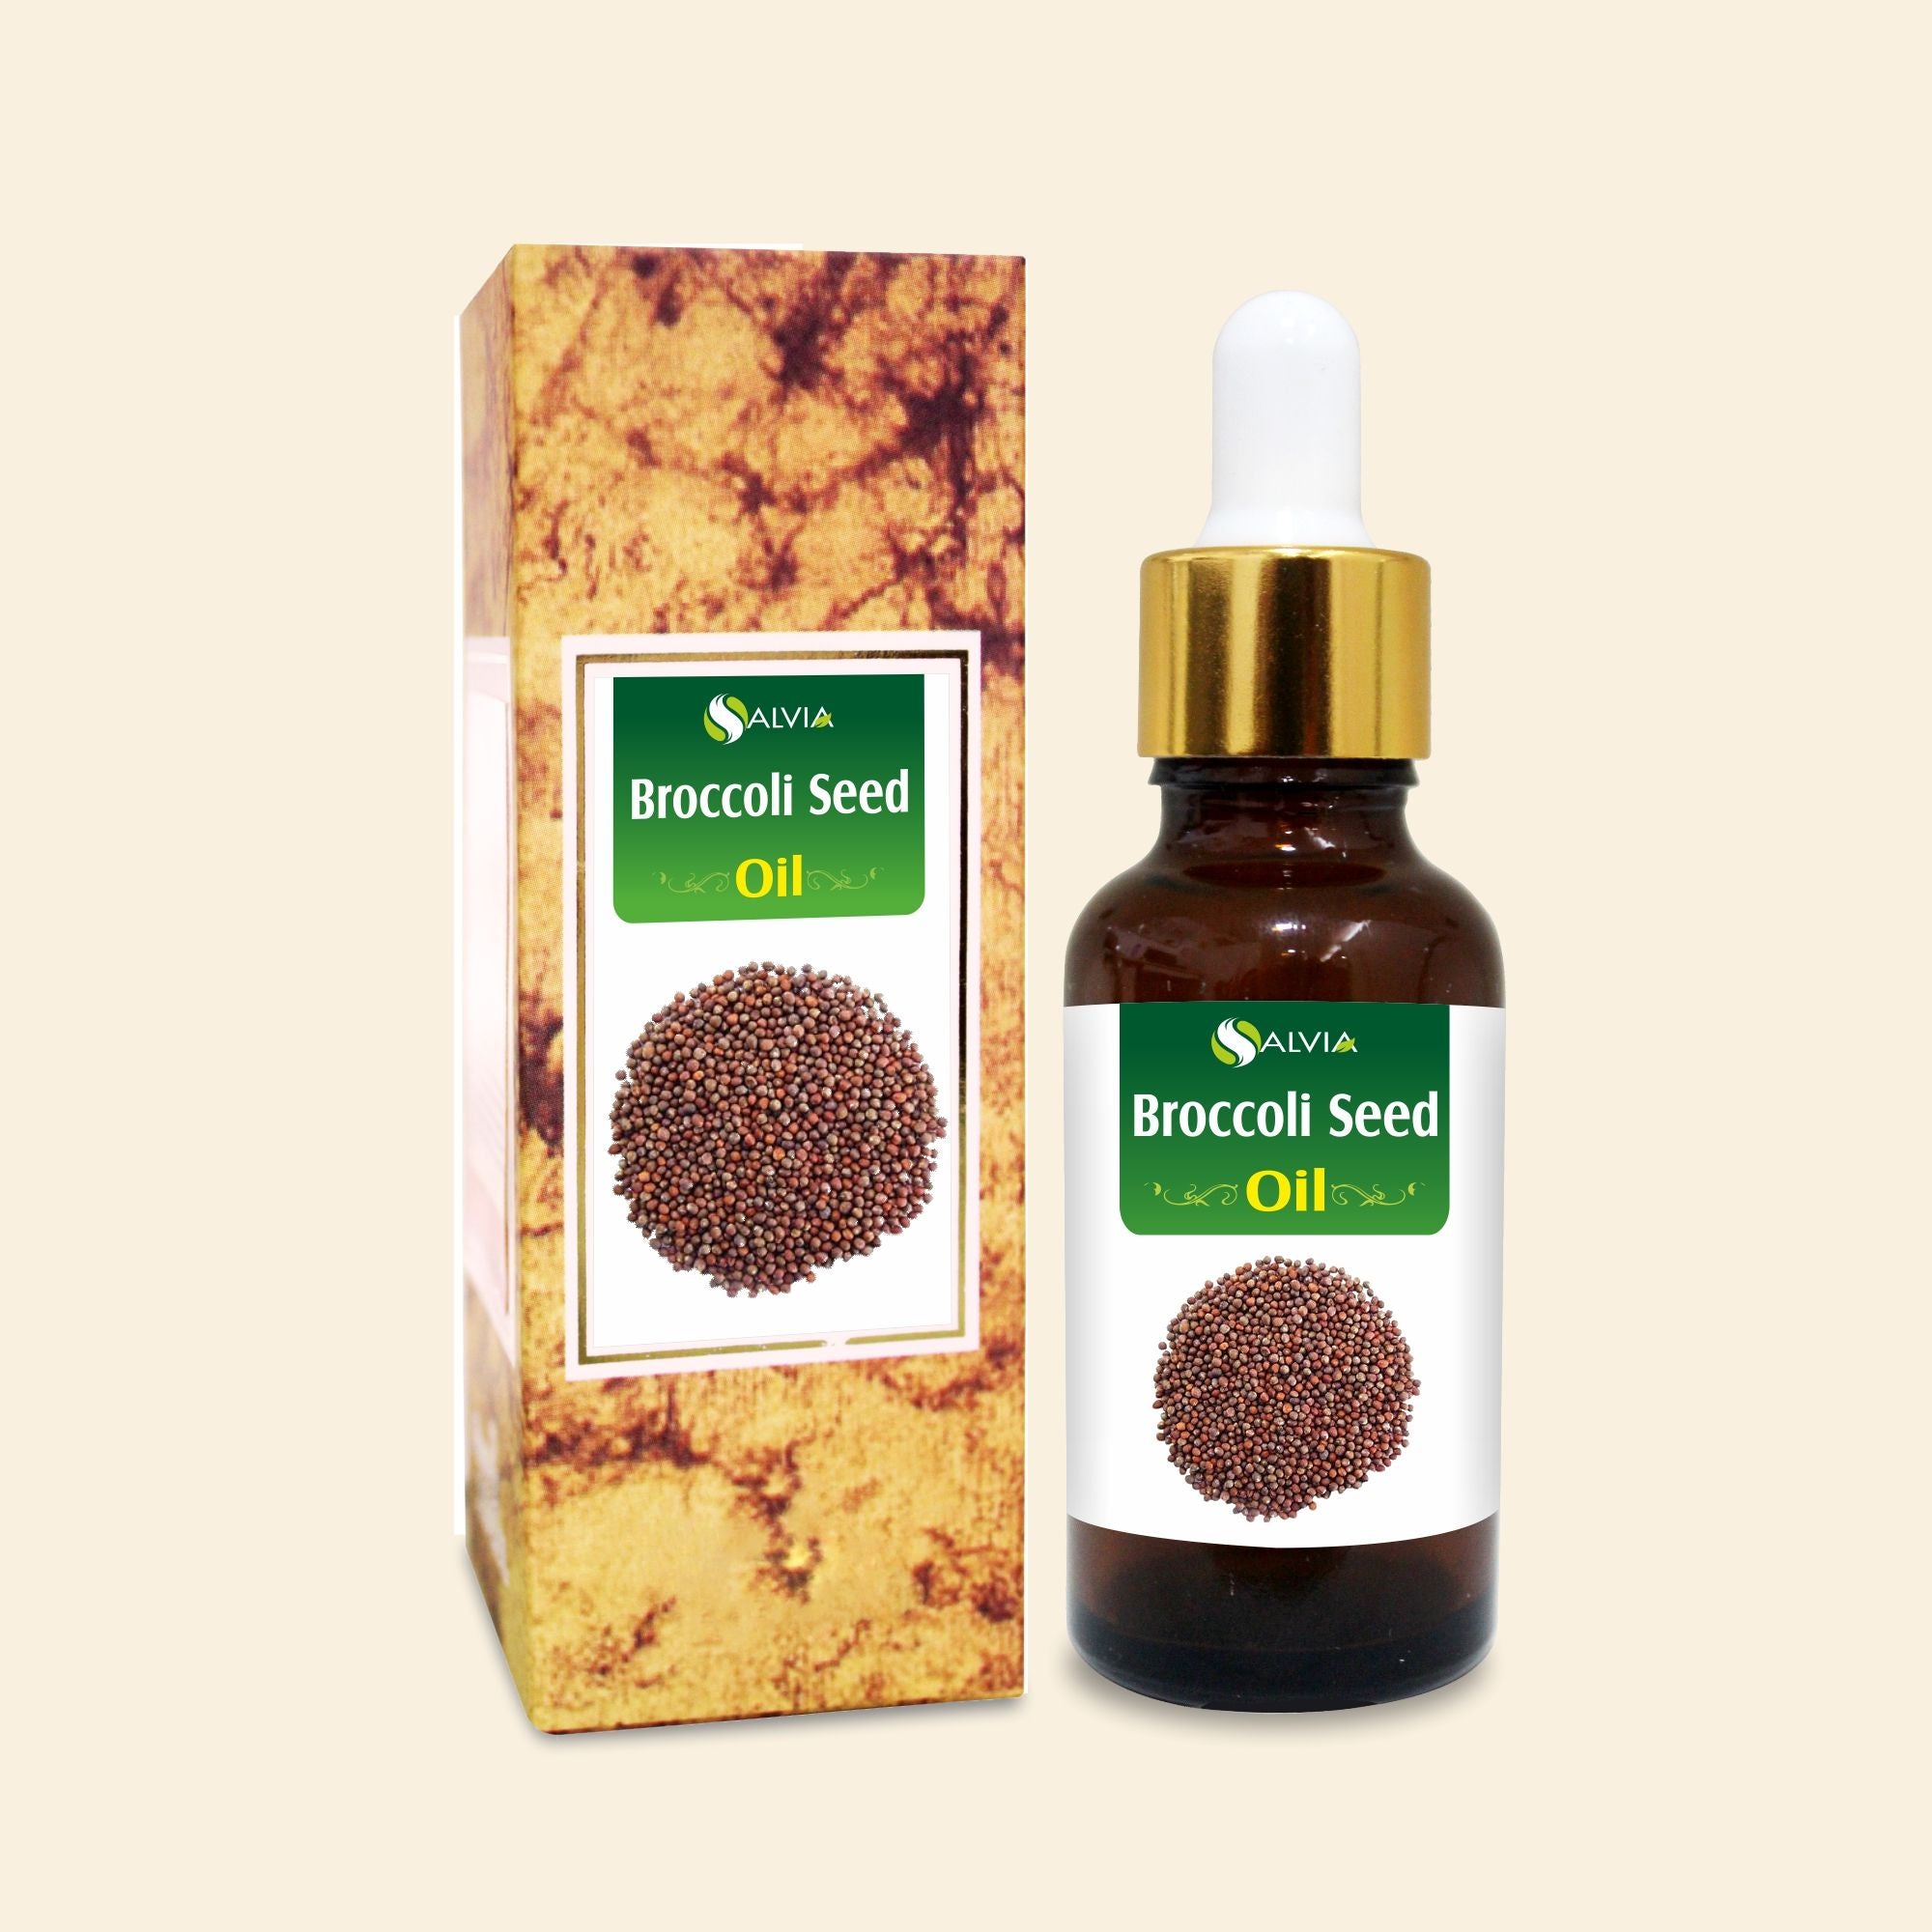 Salvia Natural Carrier Oils Broccoli Seed Oil (Brassica-Oleracea) Pure Natural Carrier Oil For Skin & hair